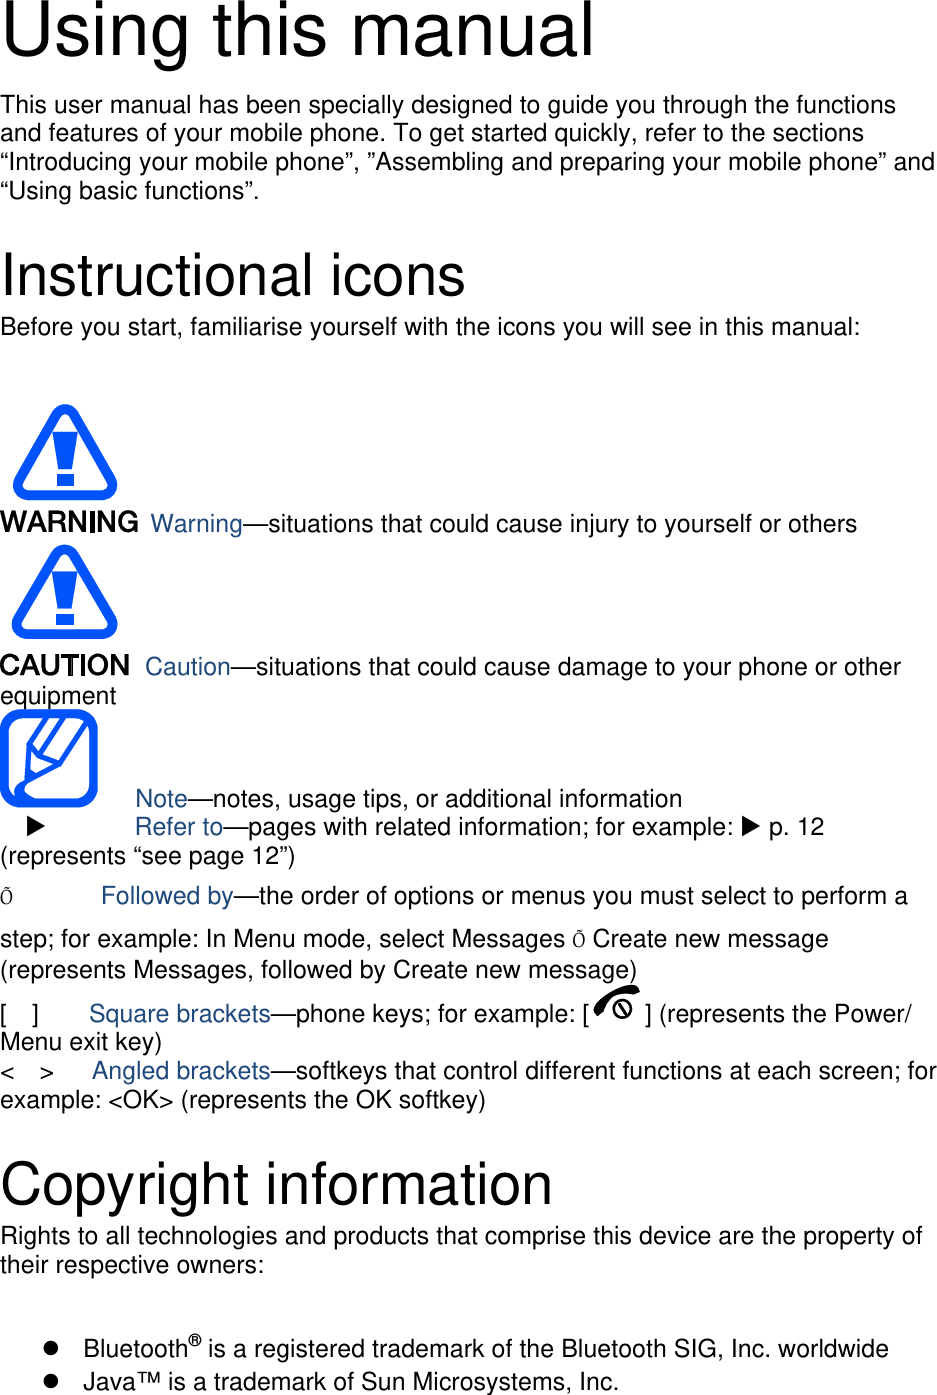 Using this manual This user manual has been specially designed to guide you through the functions and features of your mobile phone. To get started quickly, refer to the sections “Introducing your mobile phone”, ”Assembling and preparing your mobile phone” and “Using basic functions”.  Instructional icons Before you start, familiarise yourself with the icons you will see in this manual:     Warning—situations that could cause injury to yourself or others  Caution—situations that could cause damage to your phone or other equipment    Note—notes, usage tips, or additional information          Refer to—pages with related information; for example:  p. 12 (represents “see page 12”) Õ       Followed by—the order of options or menus you must select to perform a step; for example: In Menu mode, select Messages Õ Create new message (represents Messages, followed by Create new message) [  ]    Square brackets—phone keys; for example: [ ] (represents the Power/ Menu exit key) &lt;  &gt;   Angled brackets—softkeys that control different functions at each screen; for example: &lt;OK&gt; (represents the OK softkey)  Copyright information Rights to all technologies and products that comprise this device are the property of their respective owners:   Bluetooth® is a registered trademark of the Bluetooth SIG, Inc. worldwide   Java™ is a trademark of Sun Microsystems, Inc. 